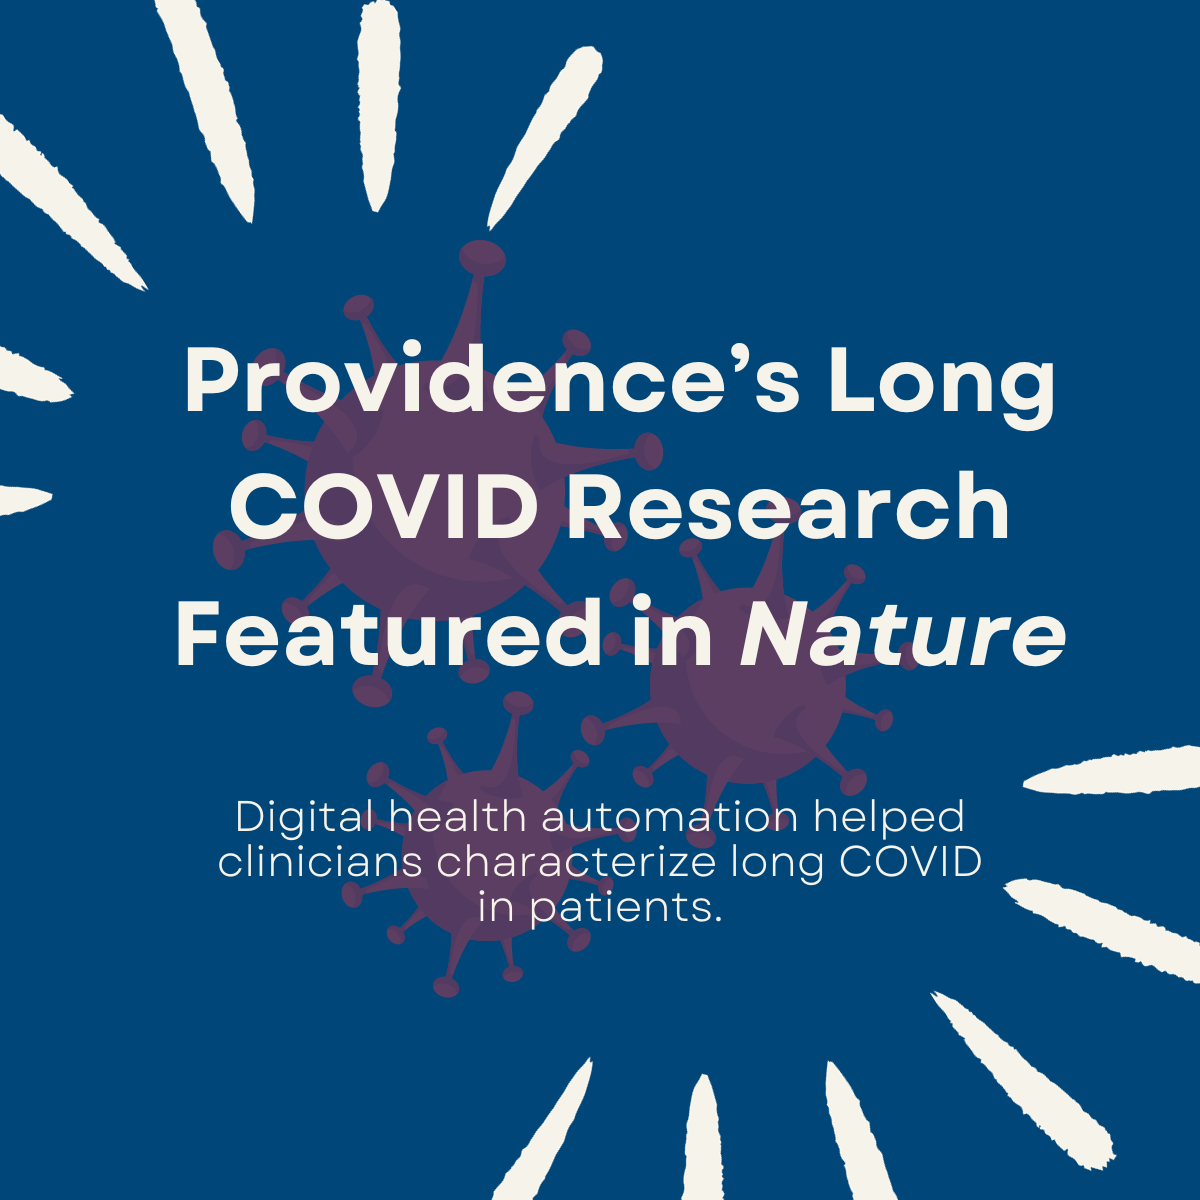 Providence’s Long COVID Research Featured in “Nature”